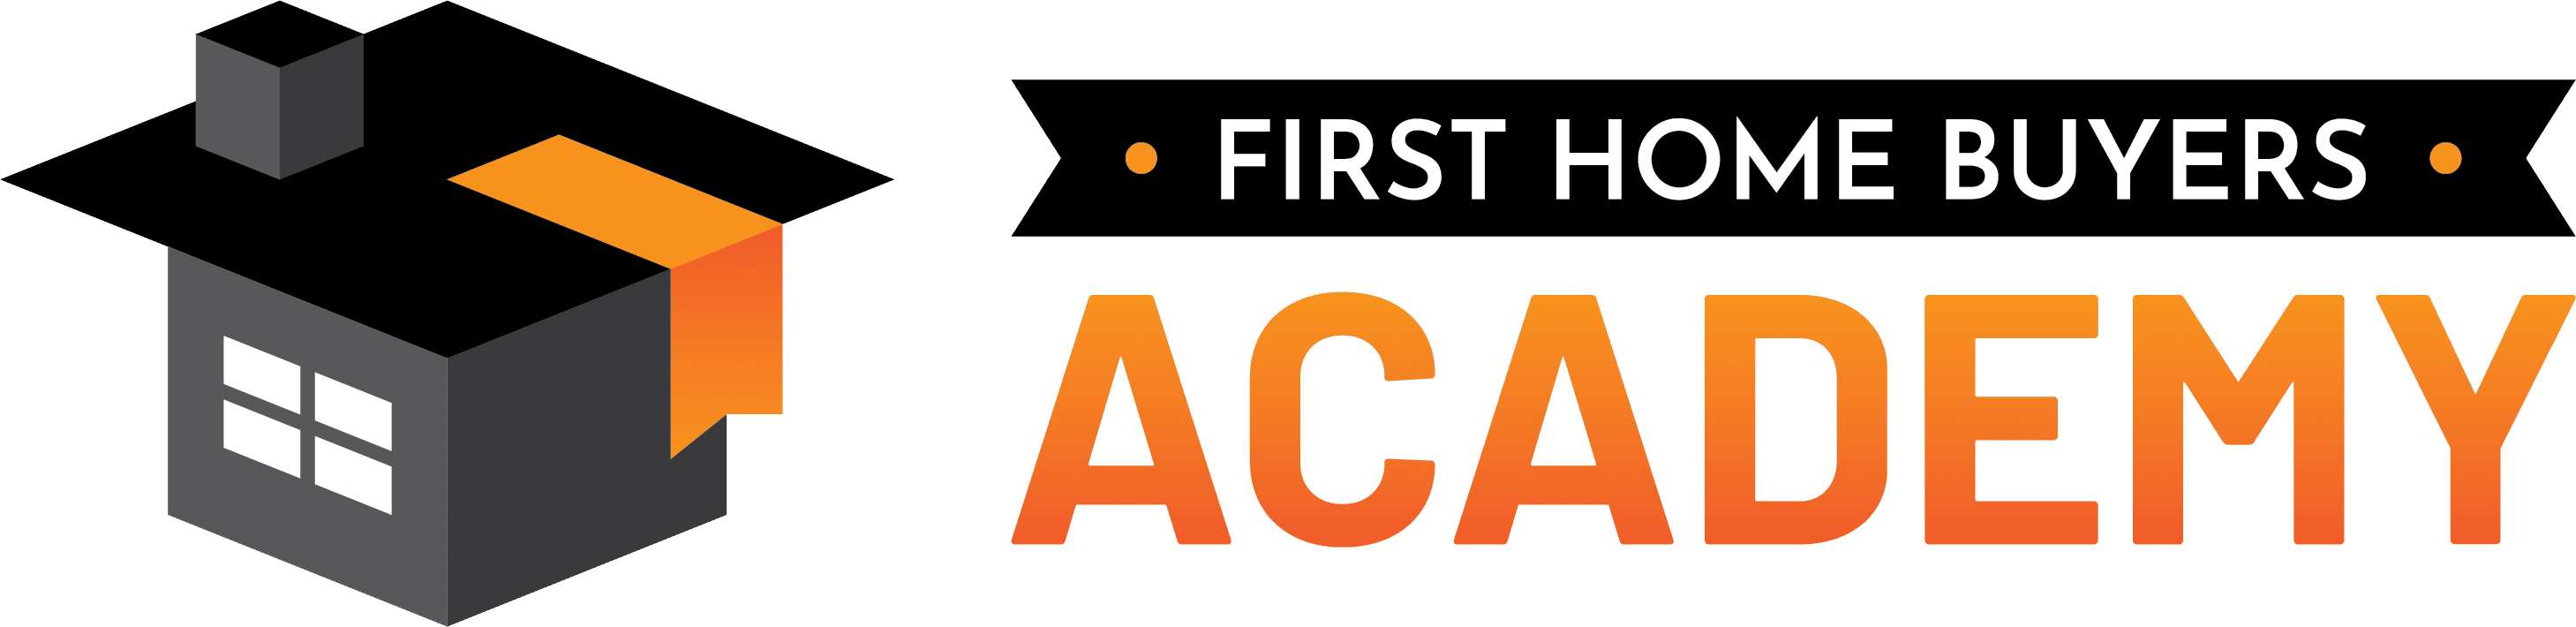 First Home Buyers Academy